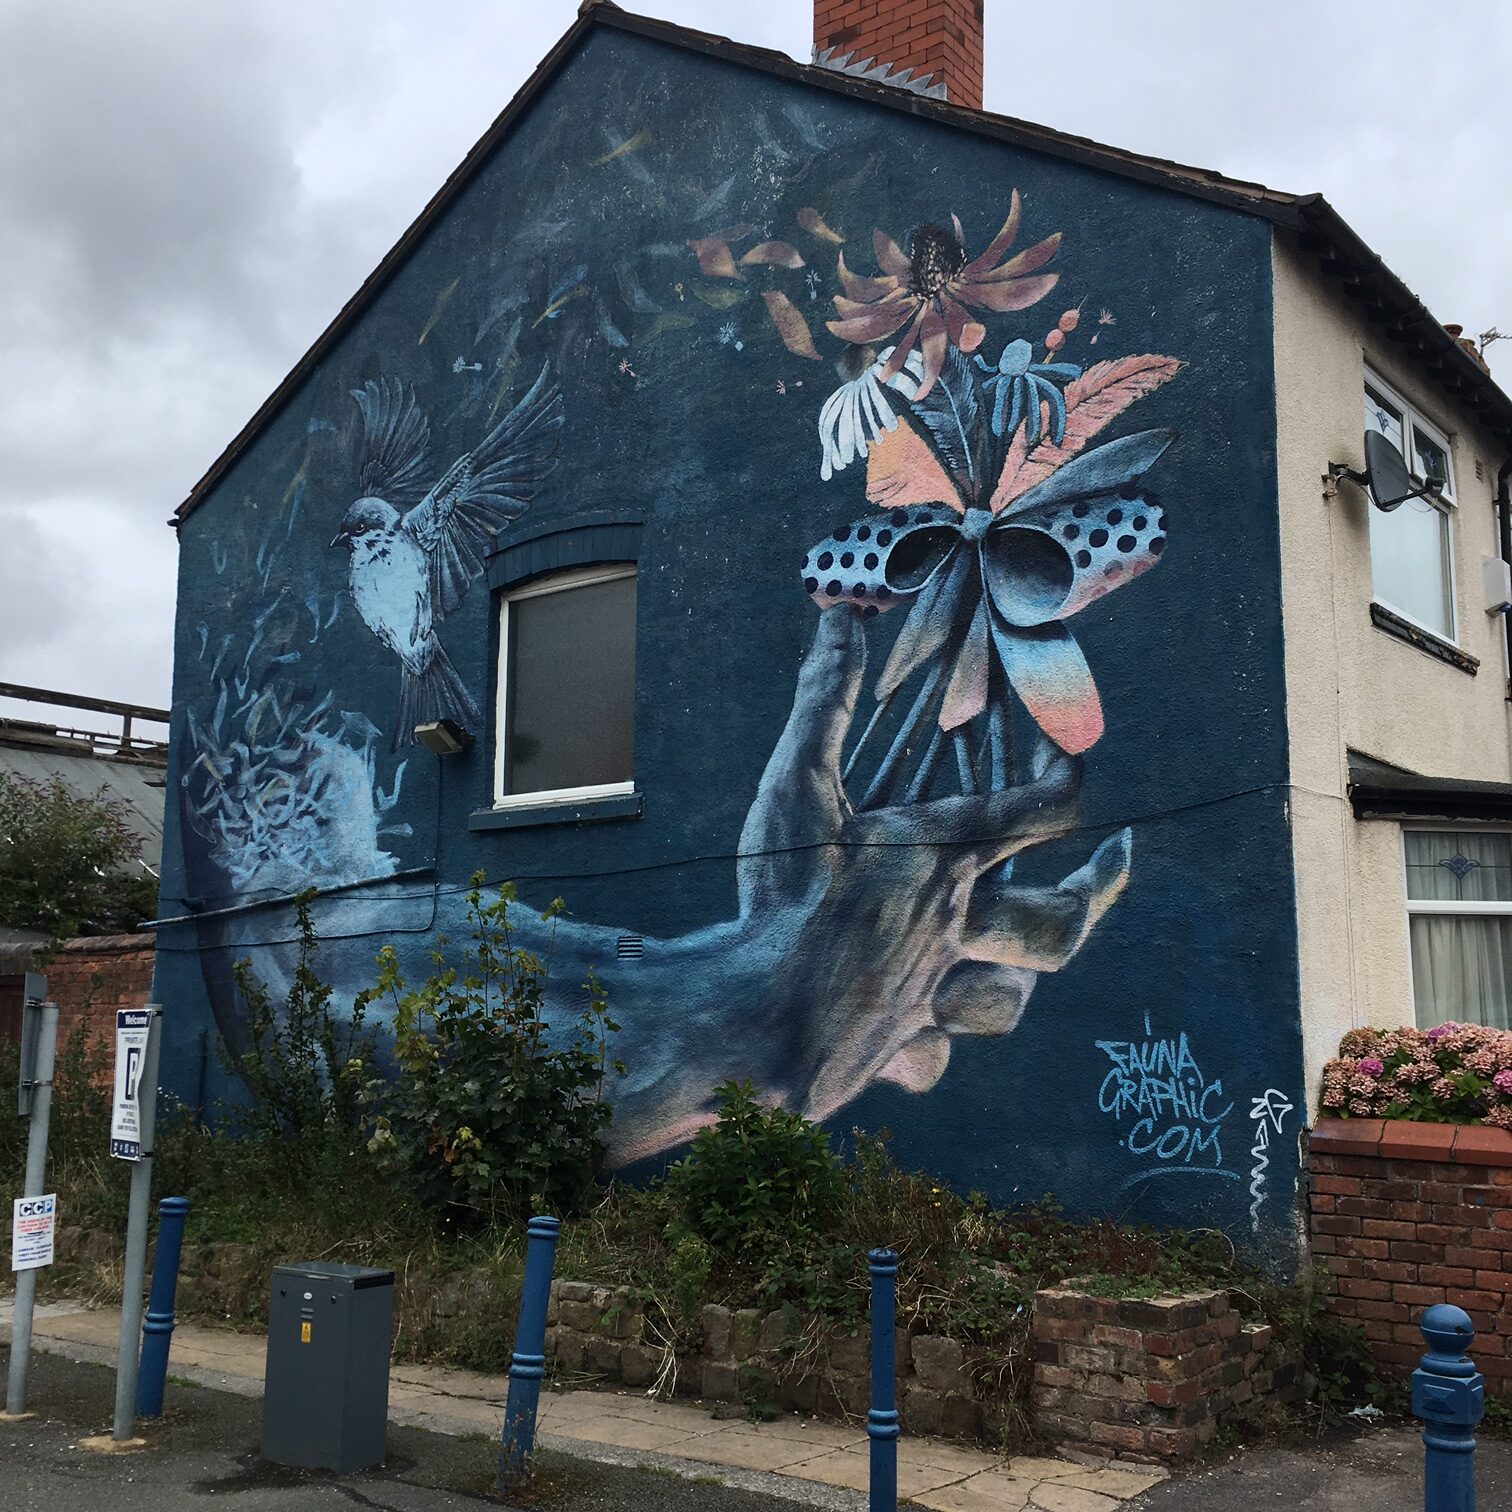 The floral themed mural by Fauna Graphic on Wright Street in Southport